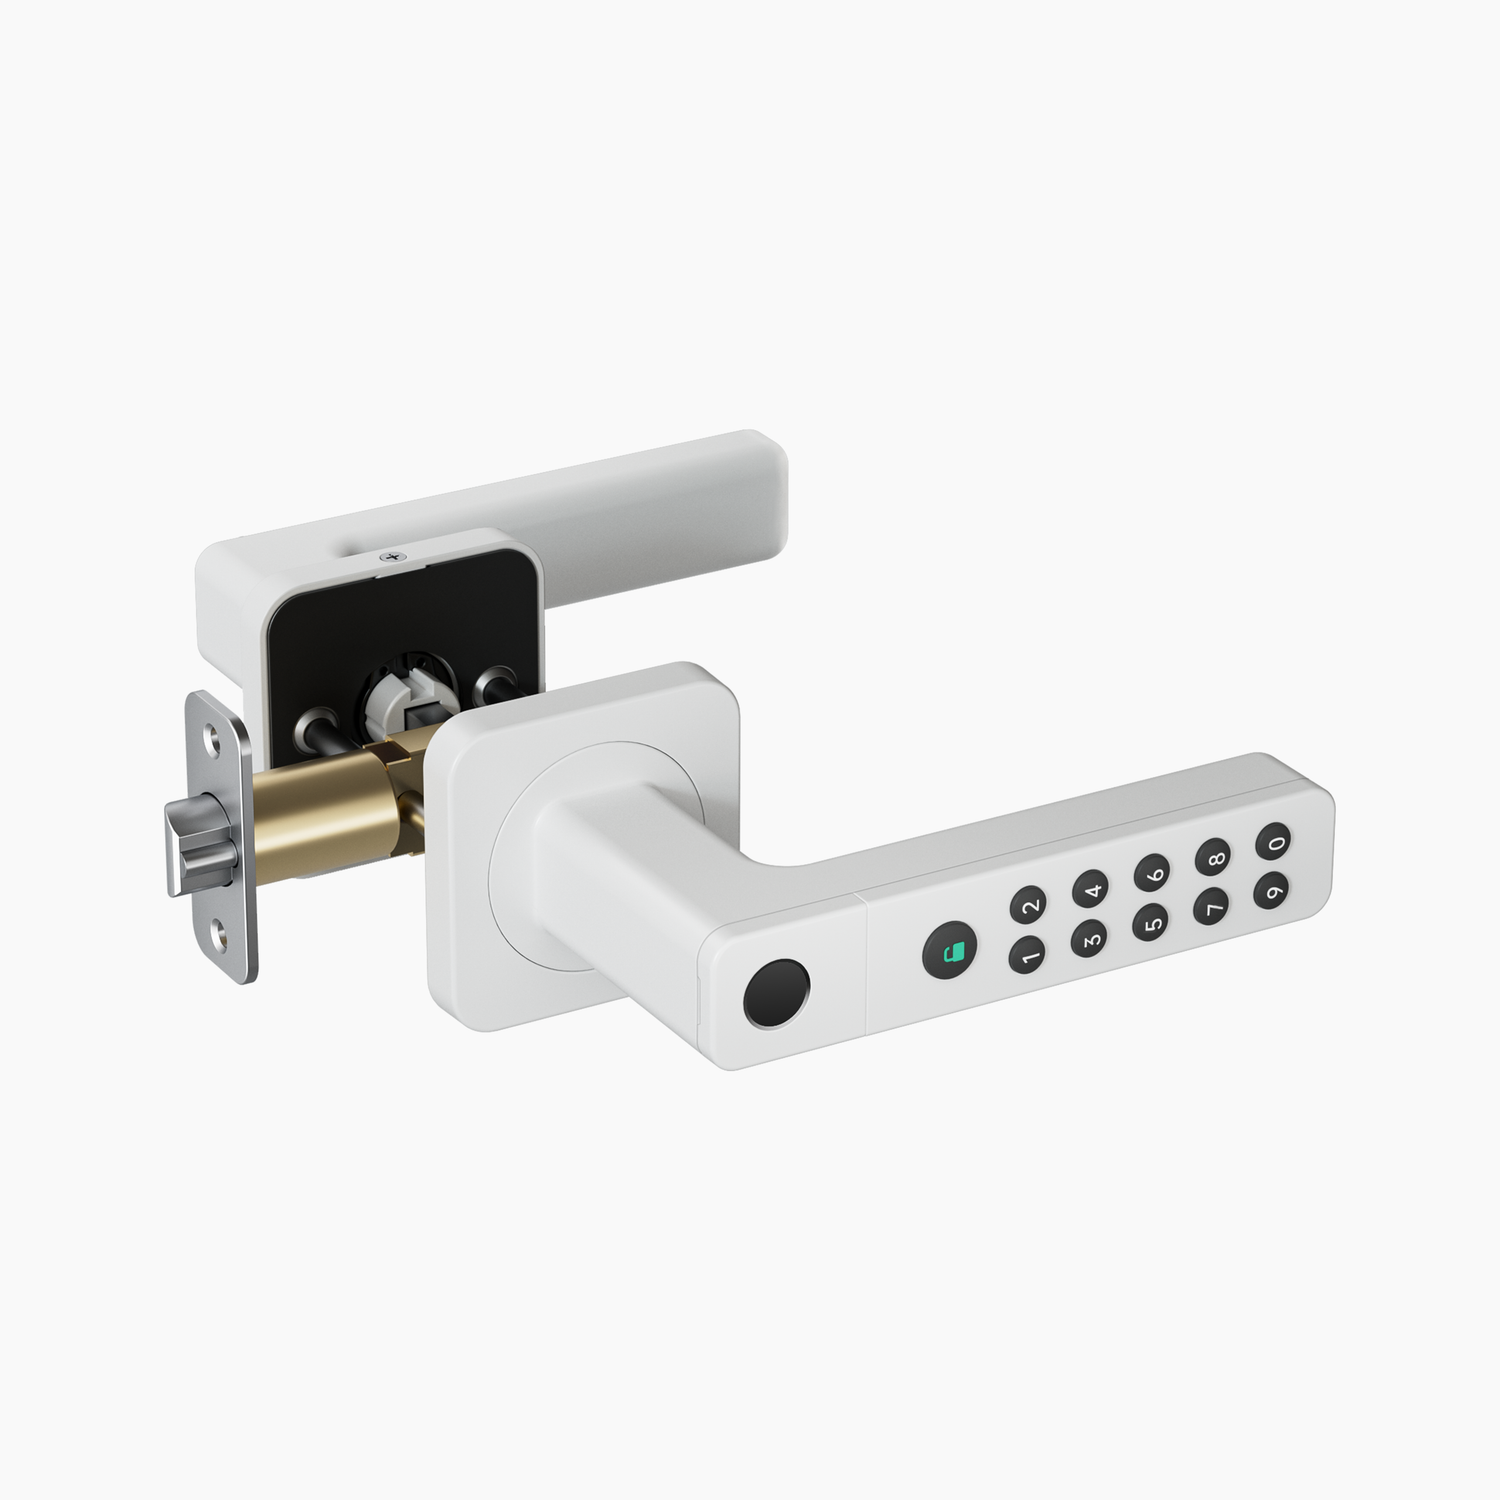 YEEUU B2P0 Smart Handle, App-enabled, with Fingerprint, NFC, and Passcode. ANSI Cylinder Inside.